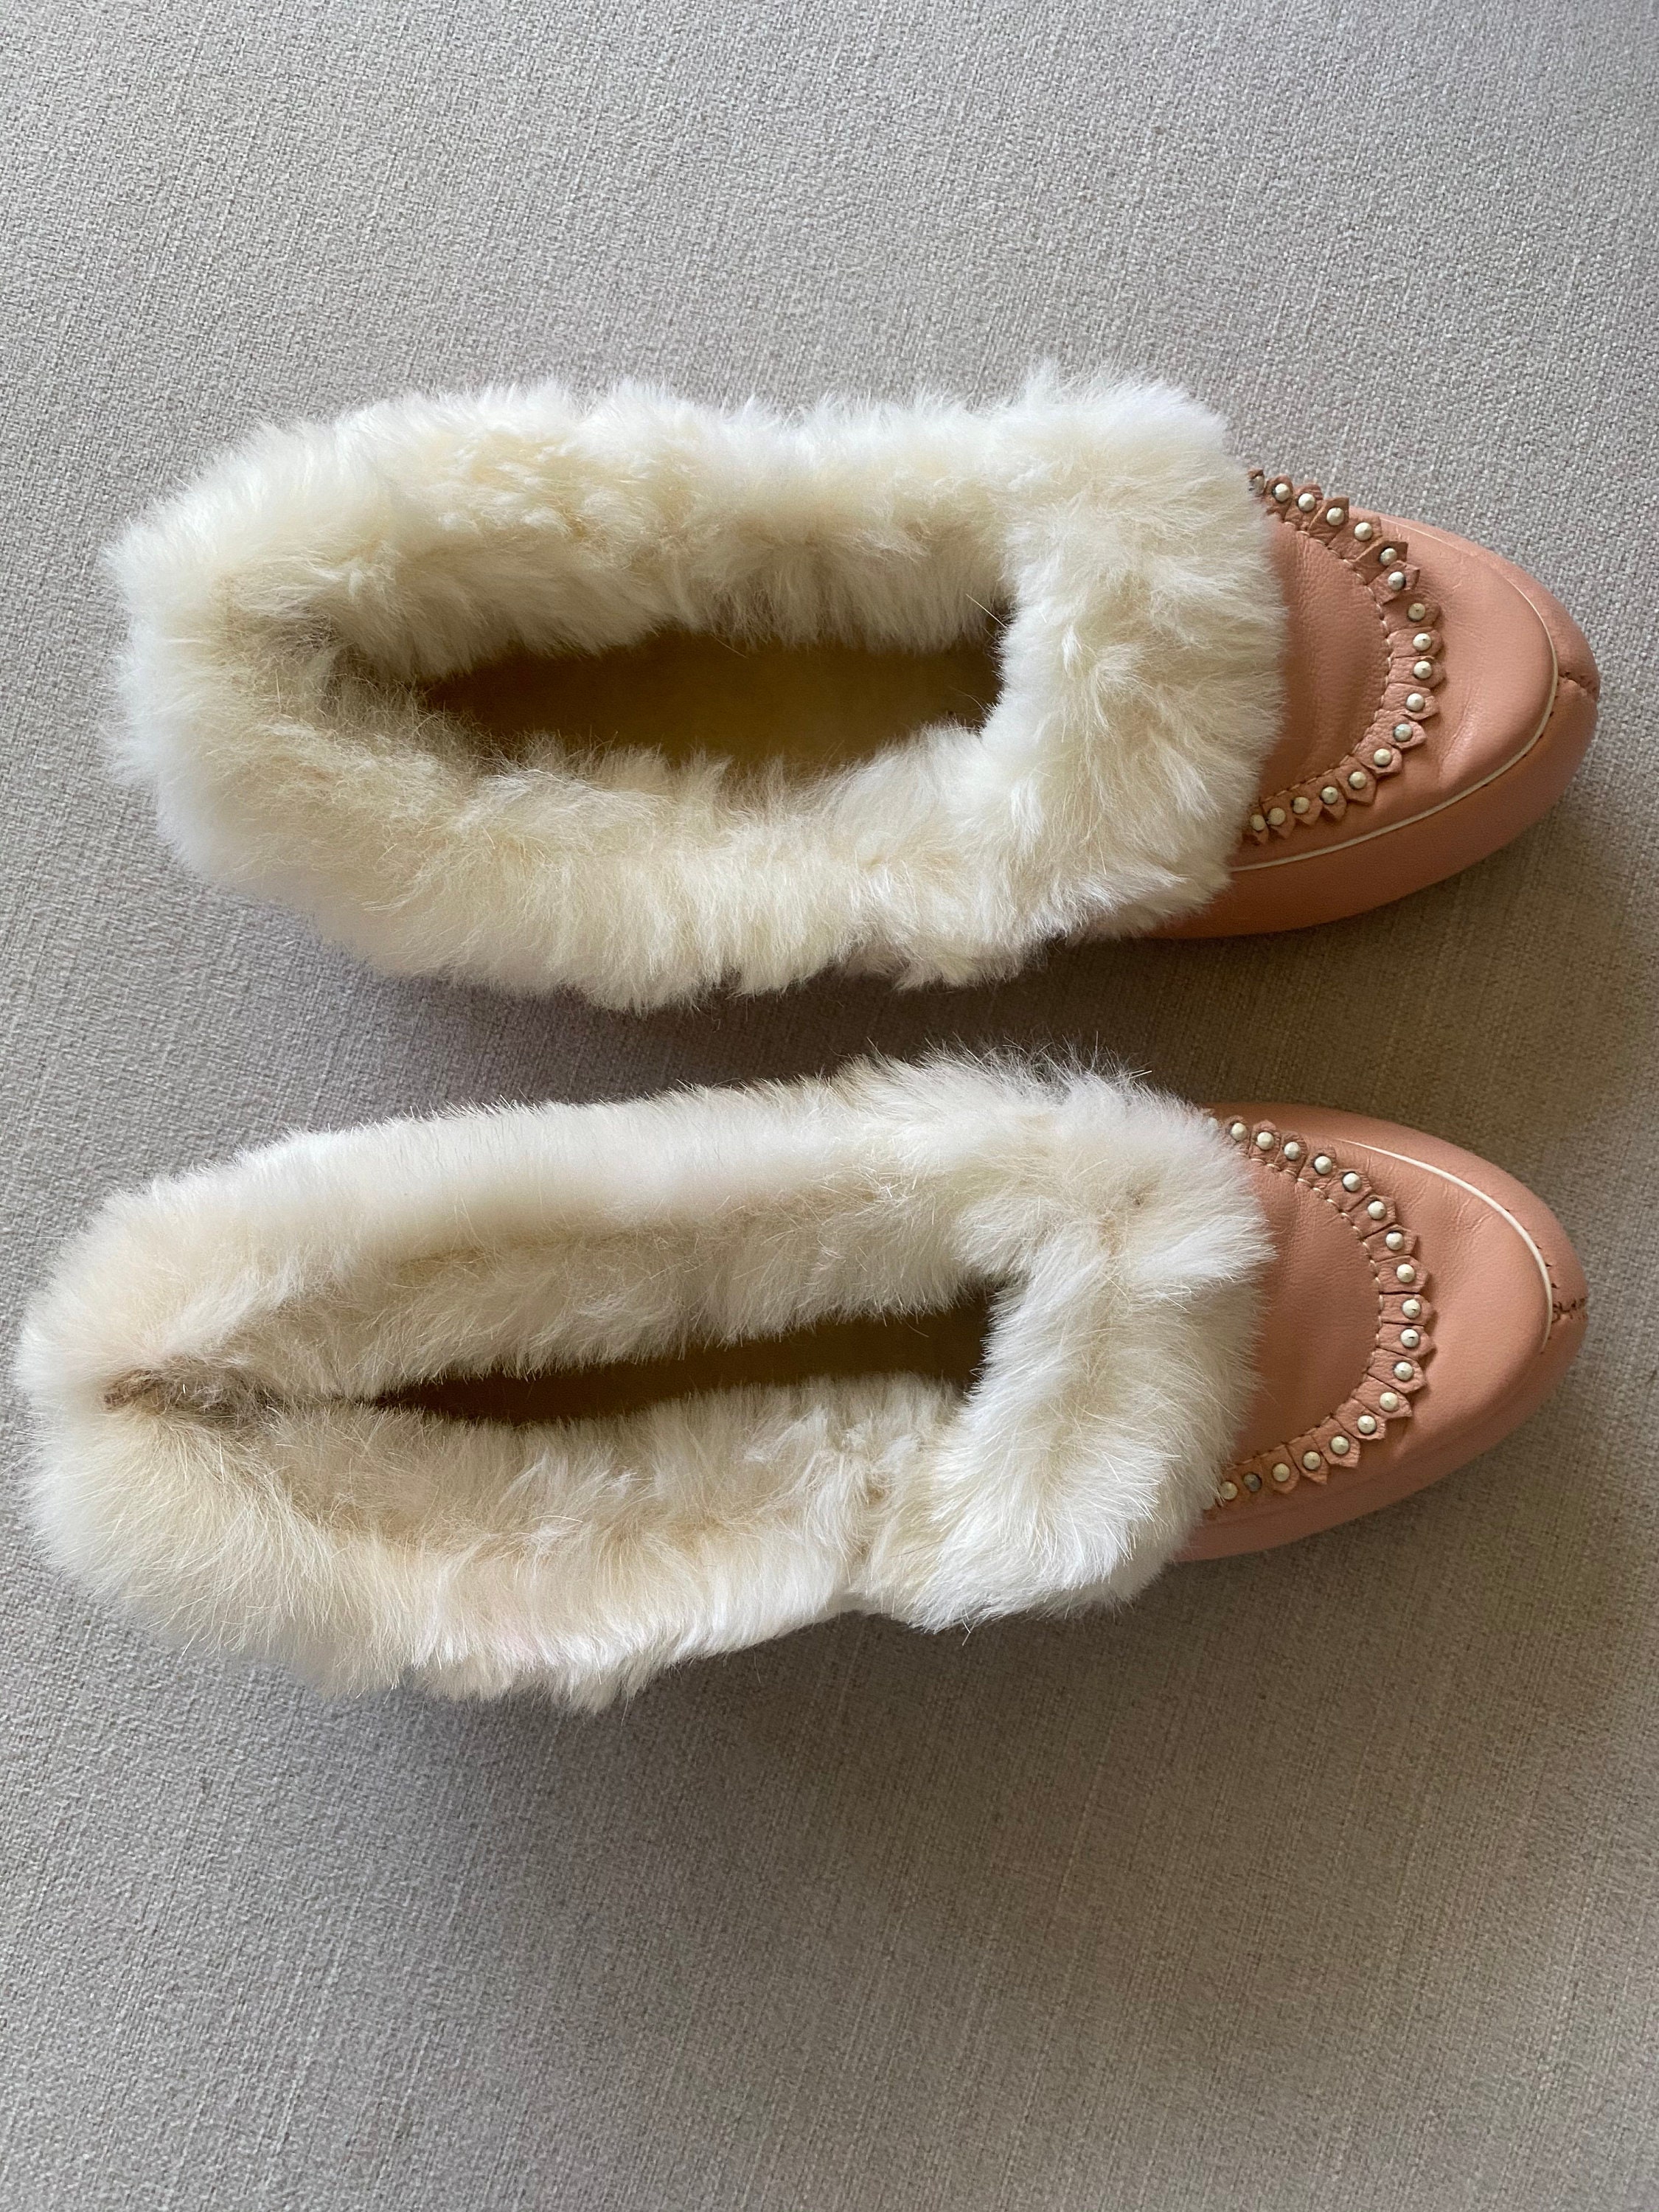 Vintage 1960'S Pink Leather Moccasins With White Rabbit | Etsy